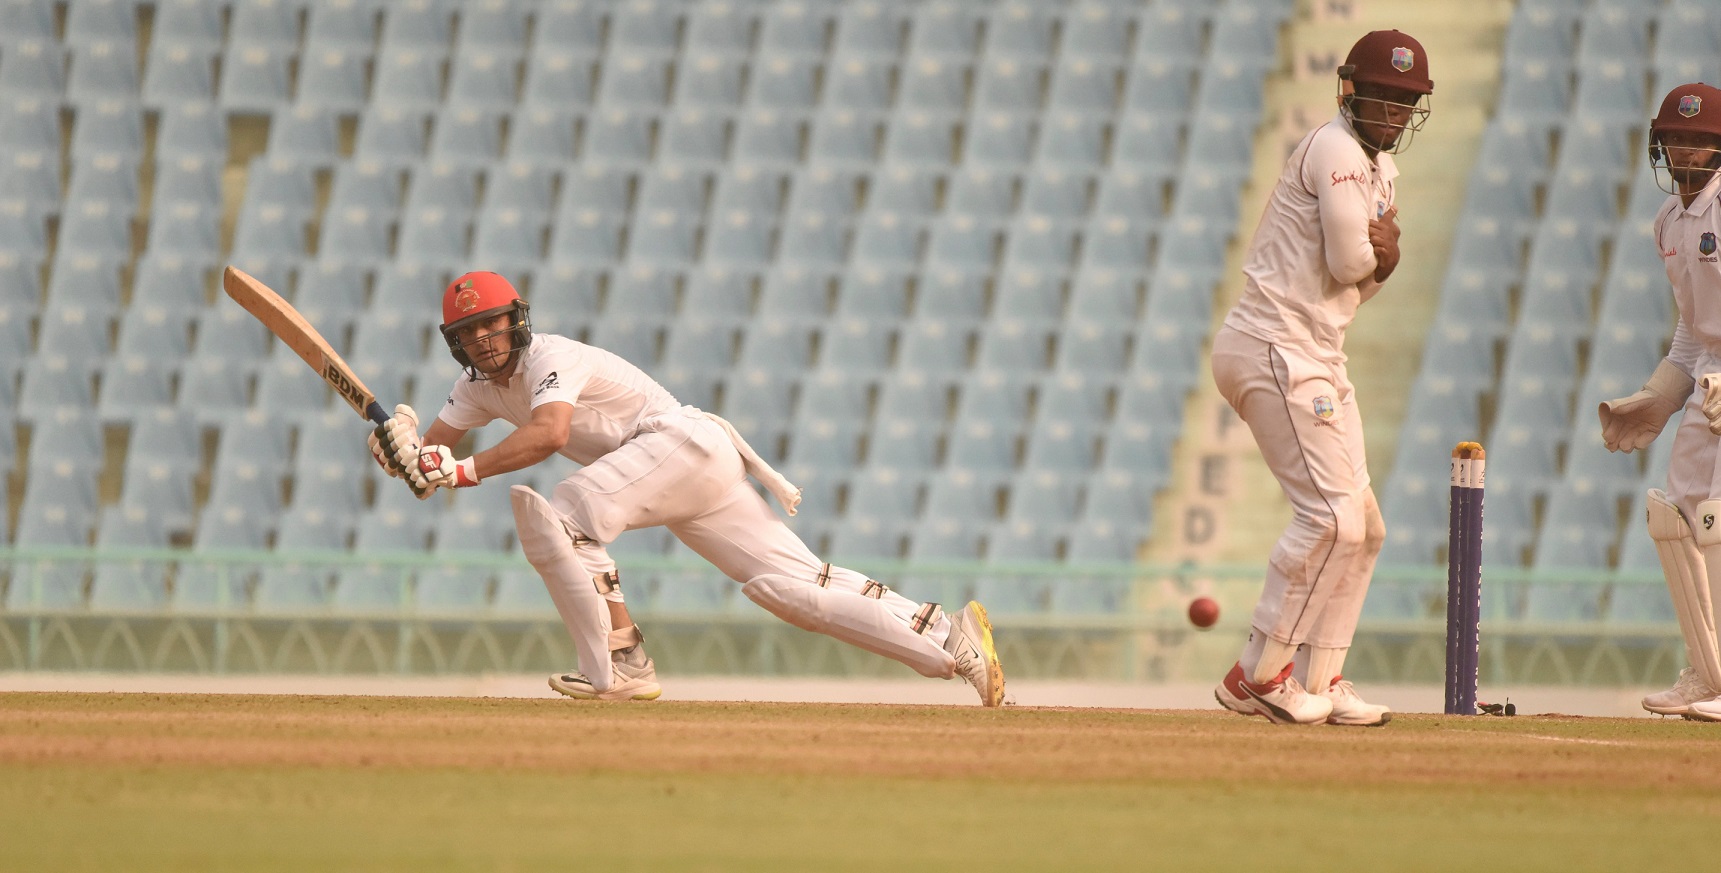 Afghanistani batsmen found the turning pitch hard to bat on and could only manage 187 runs | ACB Officials